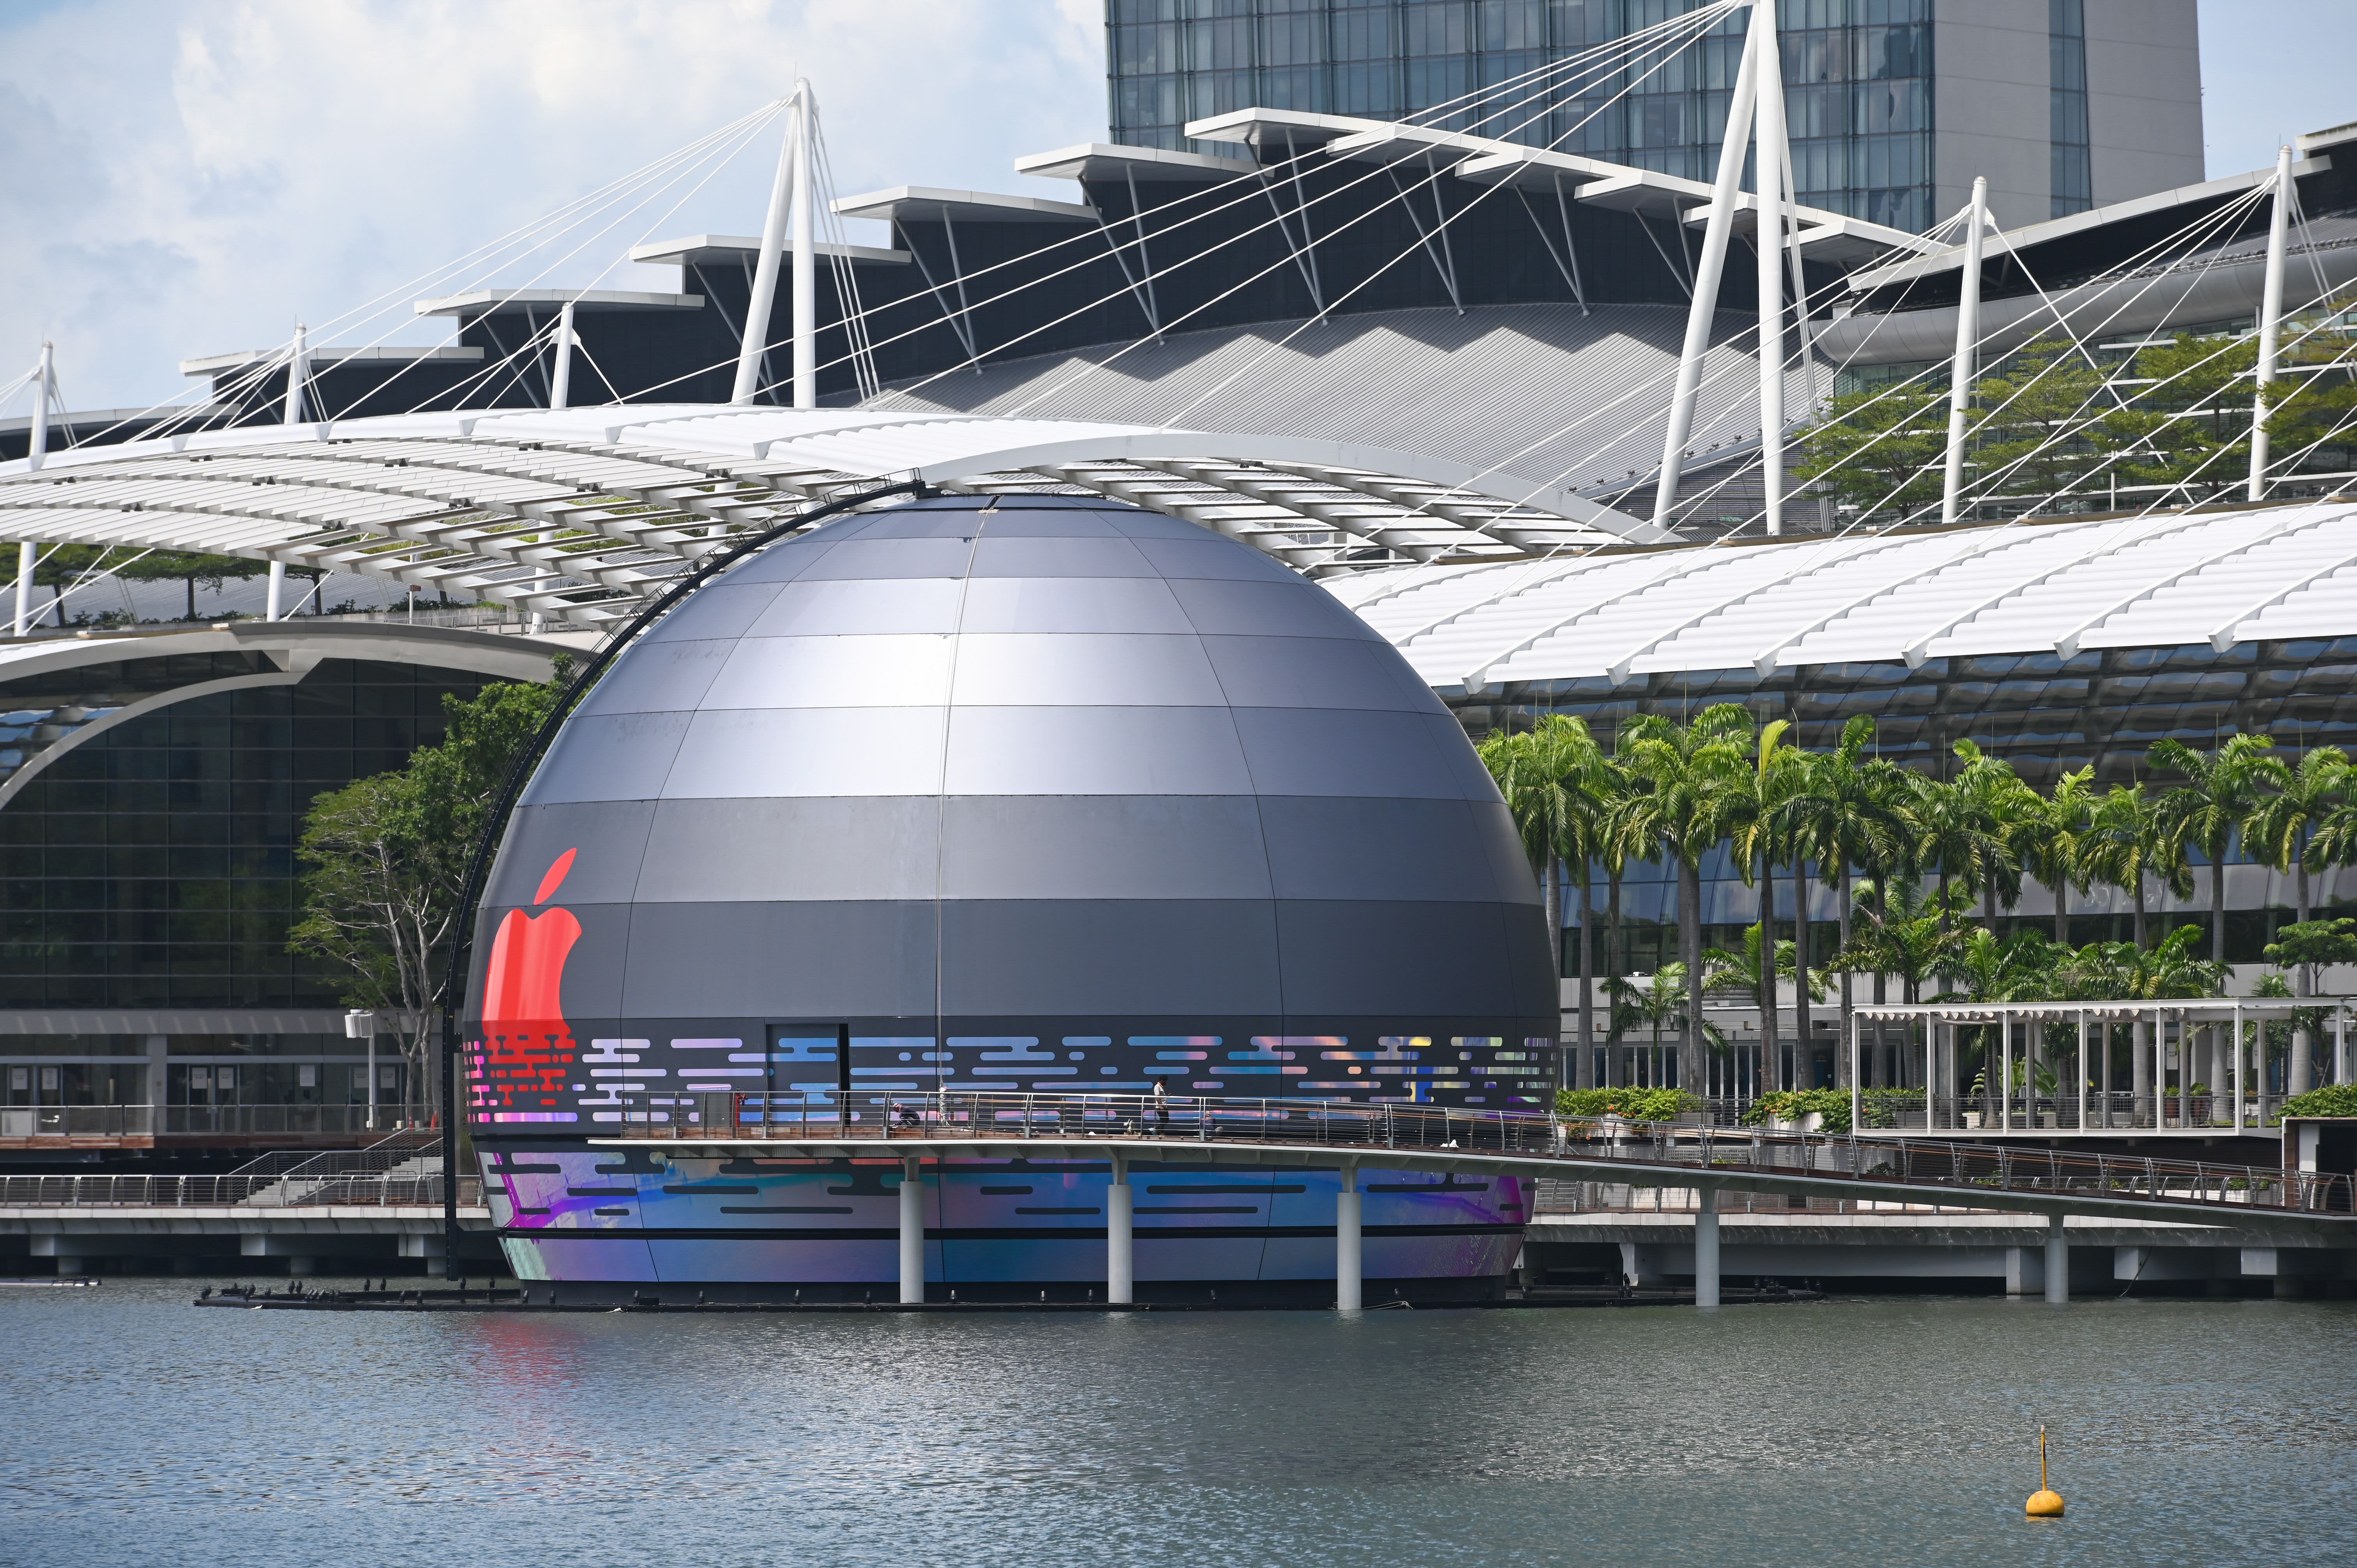 New Apple Store on the Singapore Waterfront